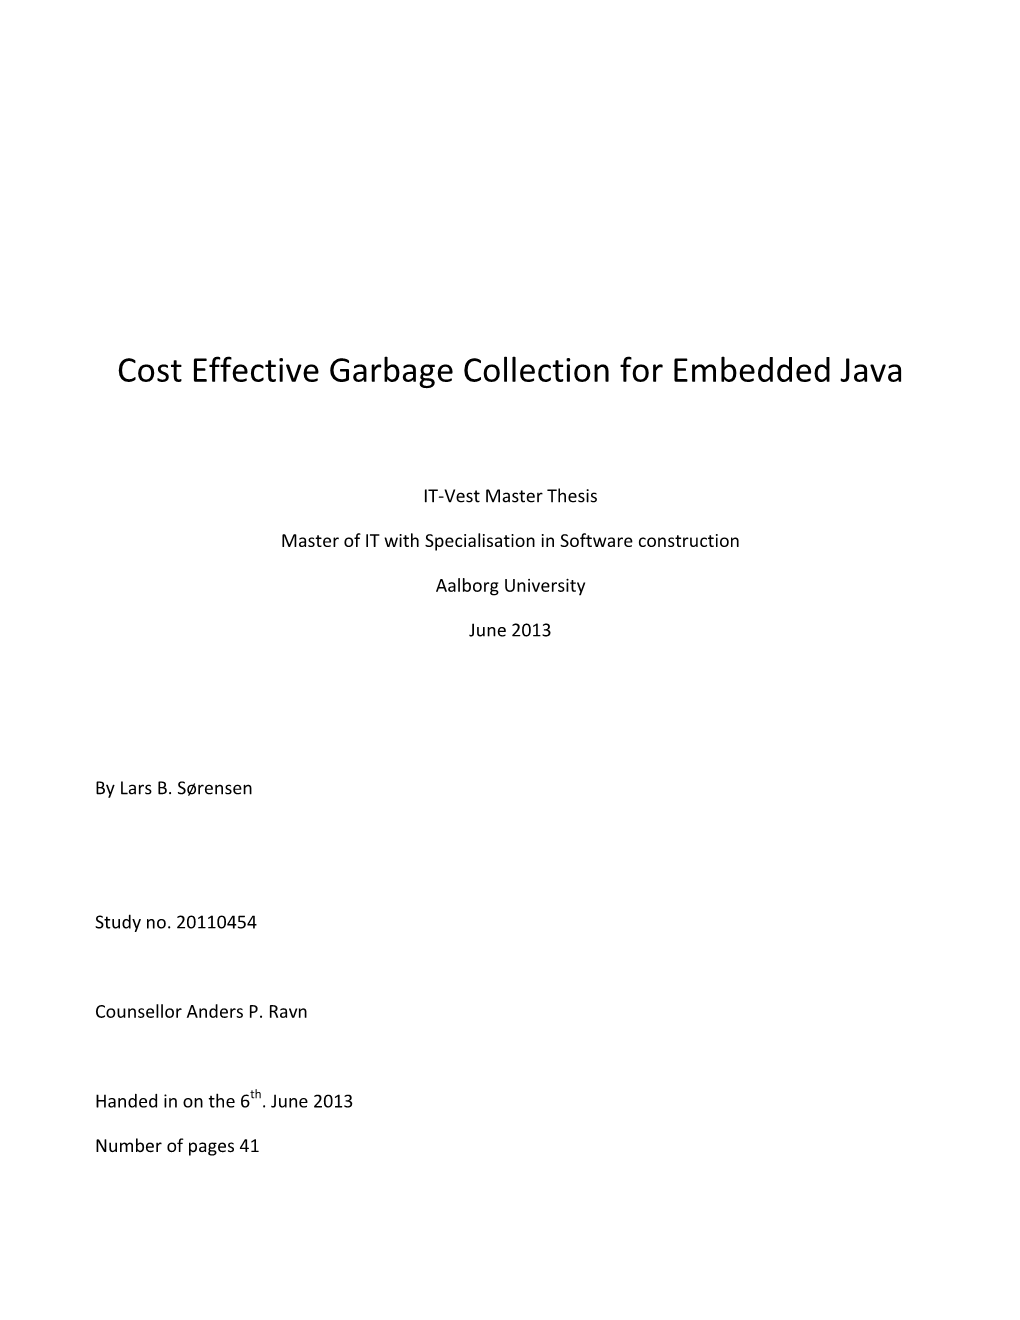 Cost Effective Garbage Collection for Embedded Java